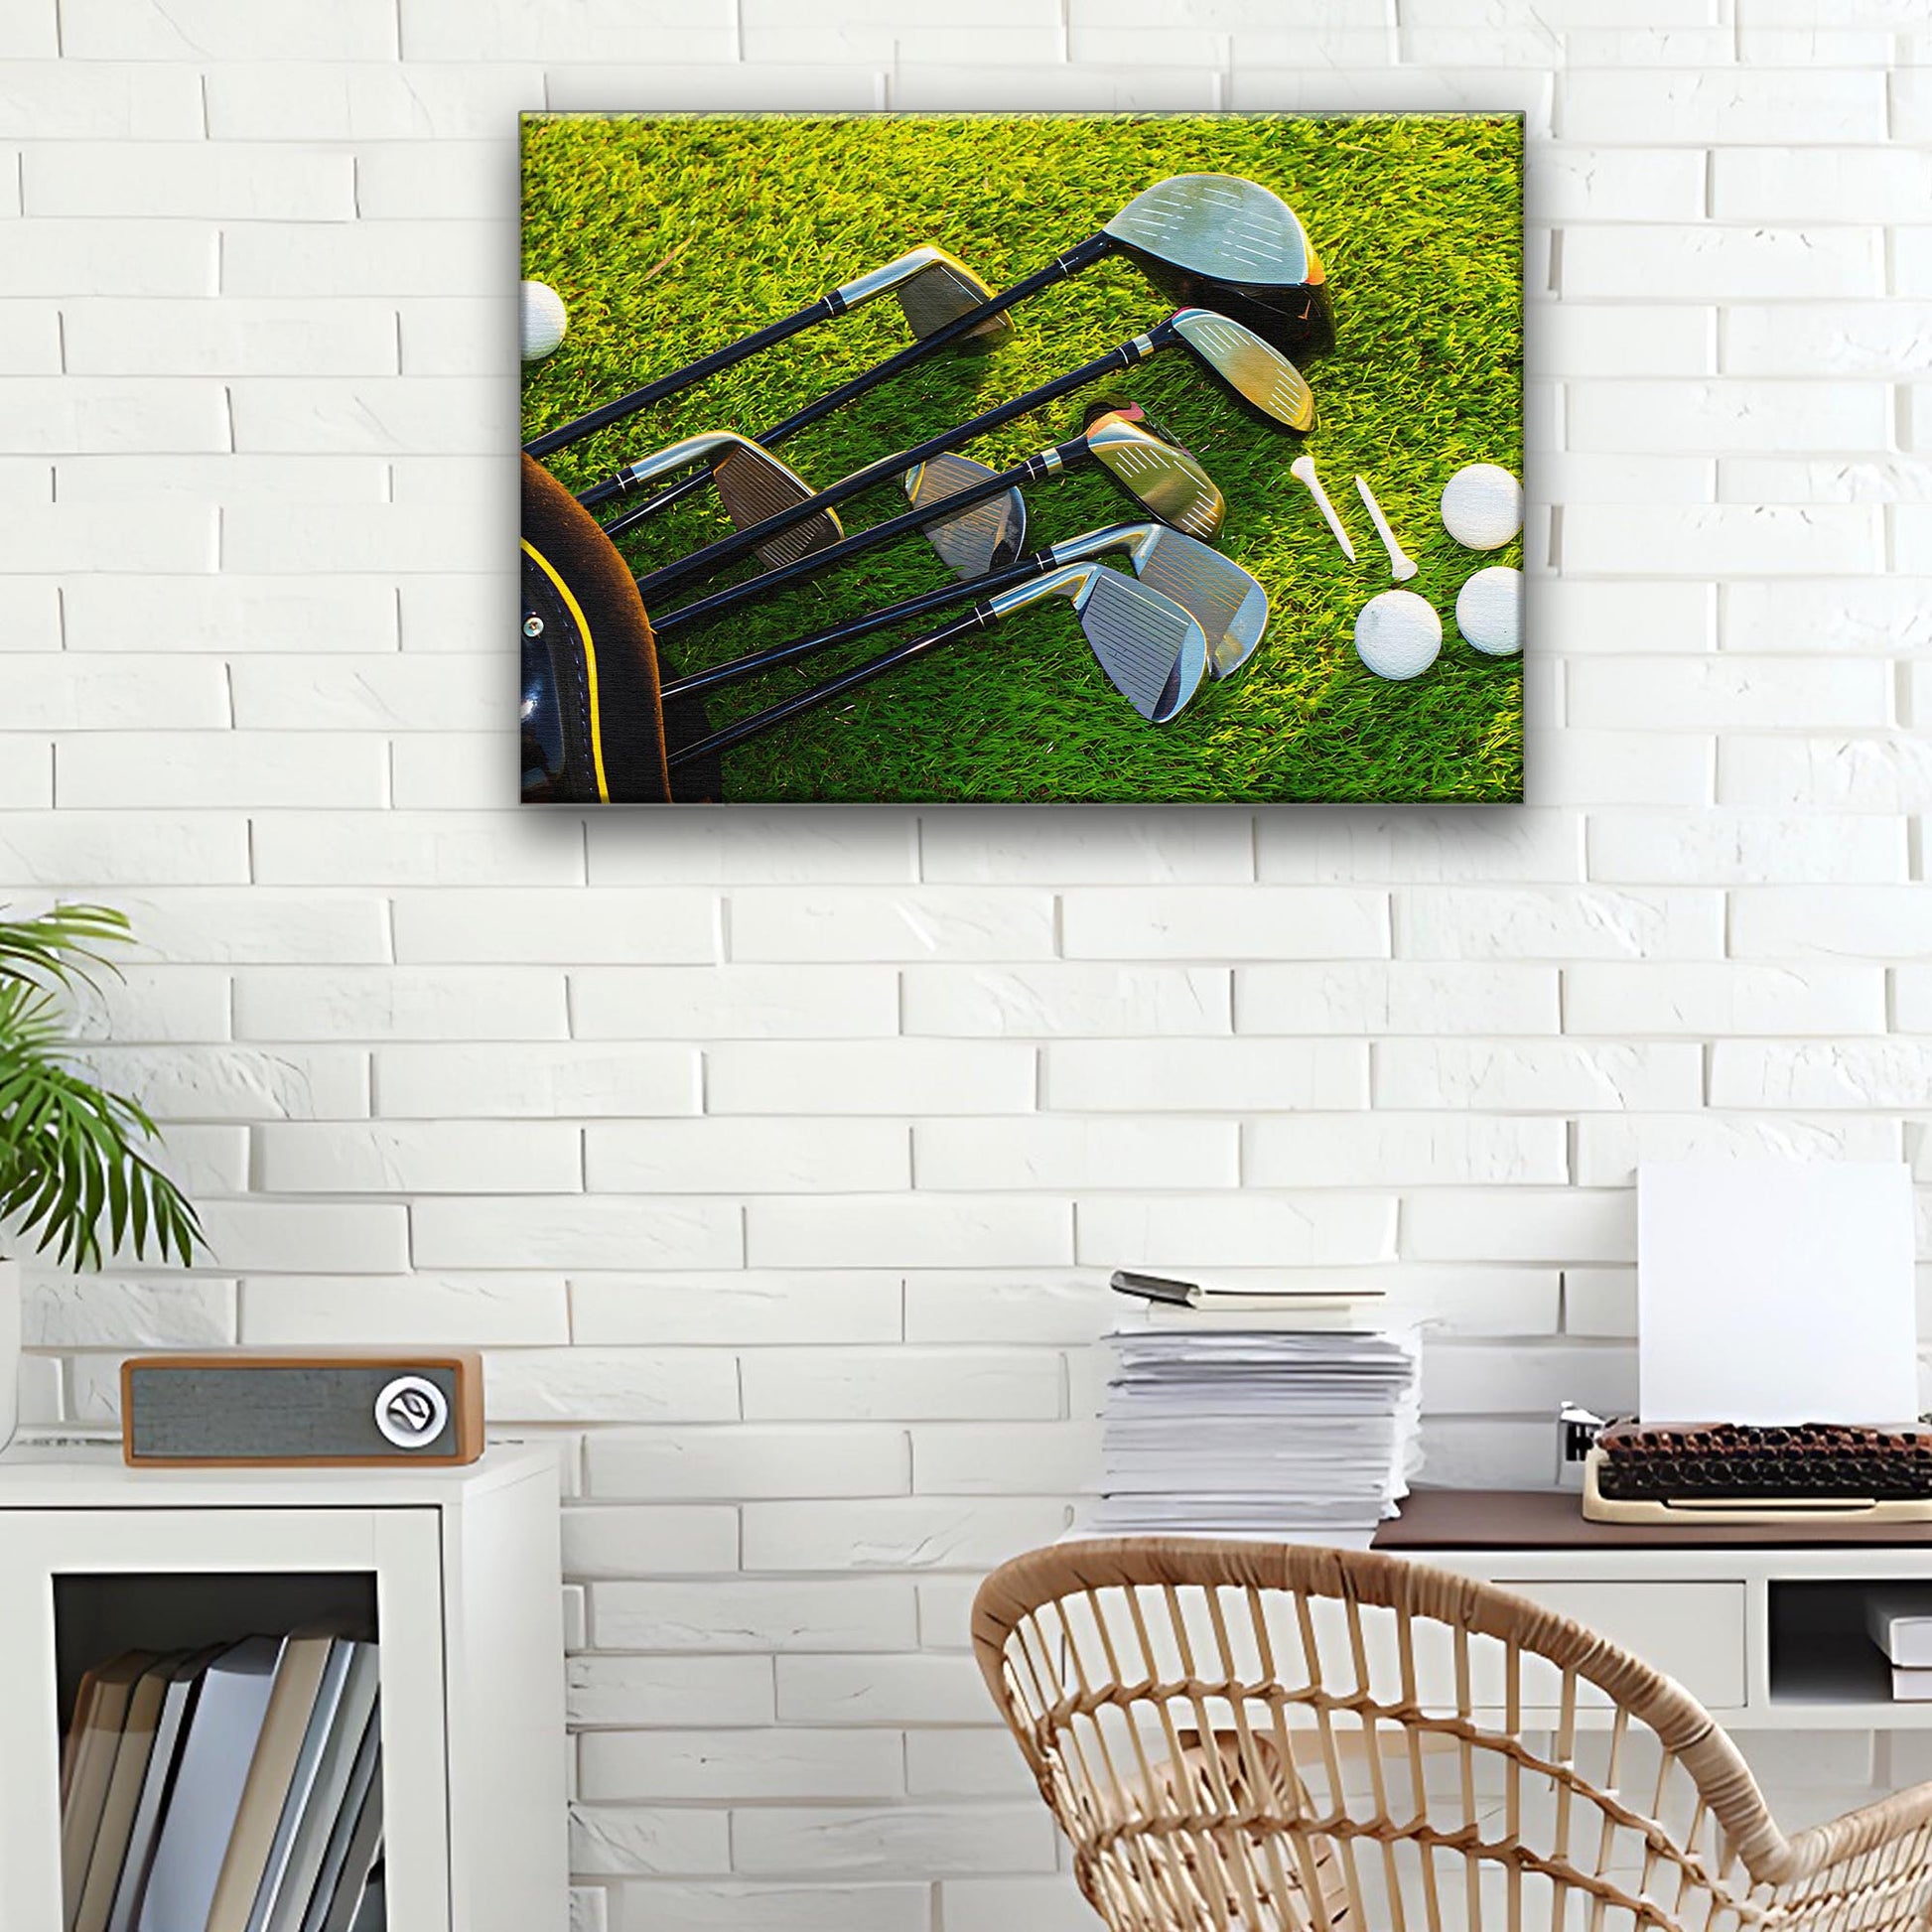 Golf Iron Clubs Canvas Wall Art  Style 1 - Image by Tailored Canvases